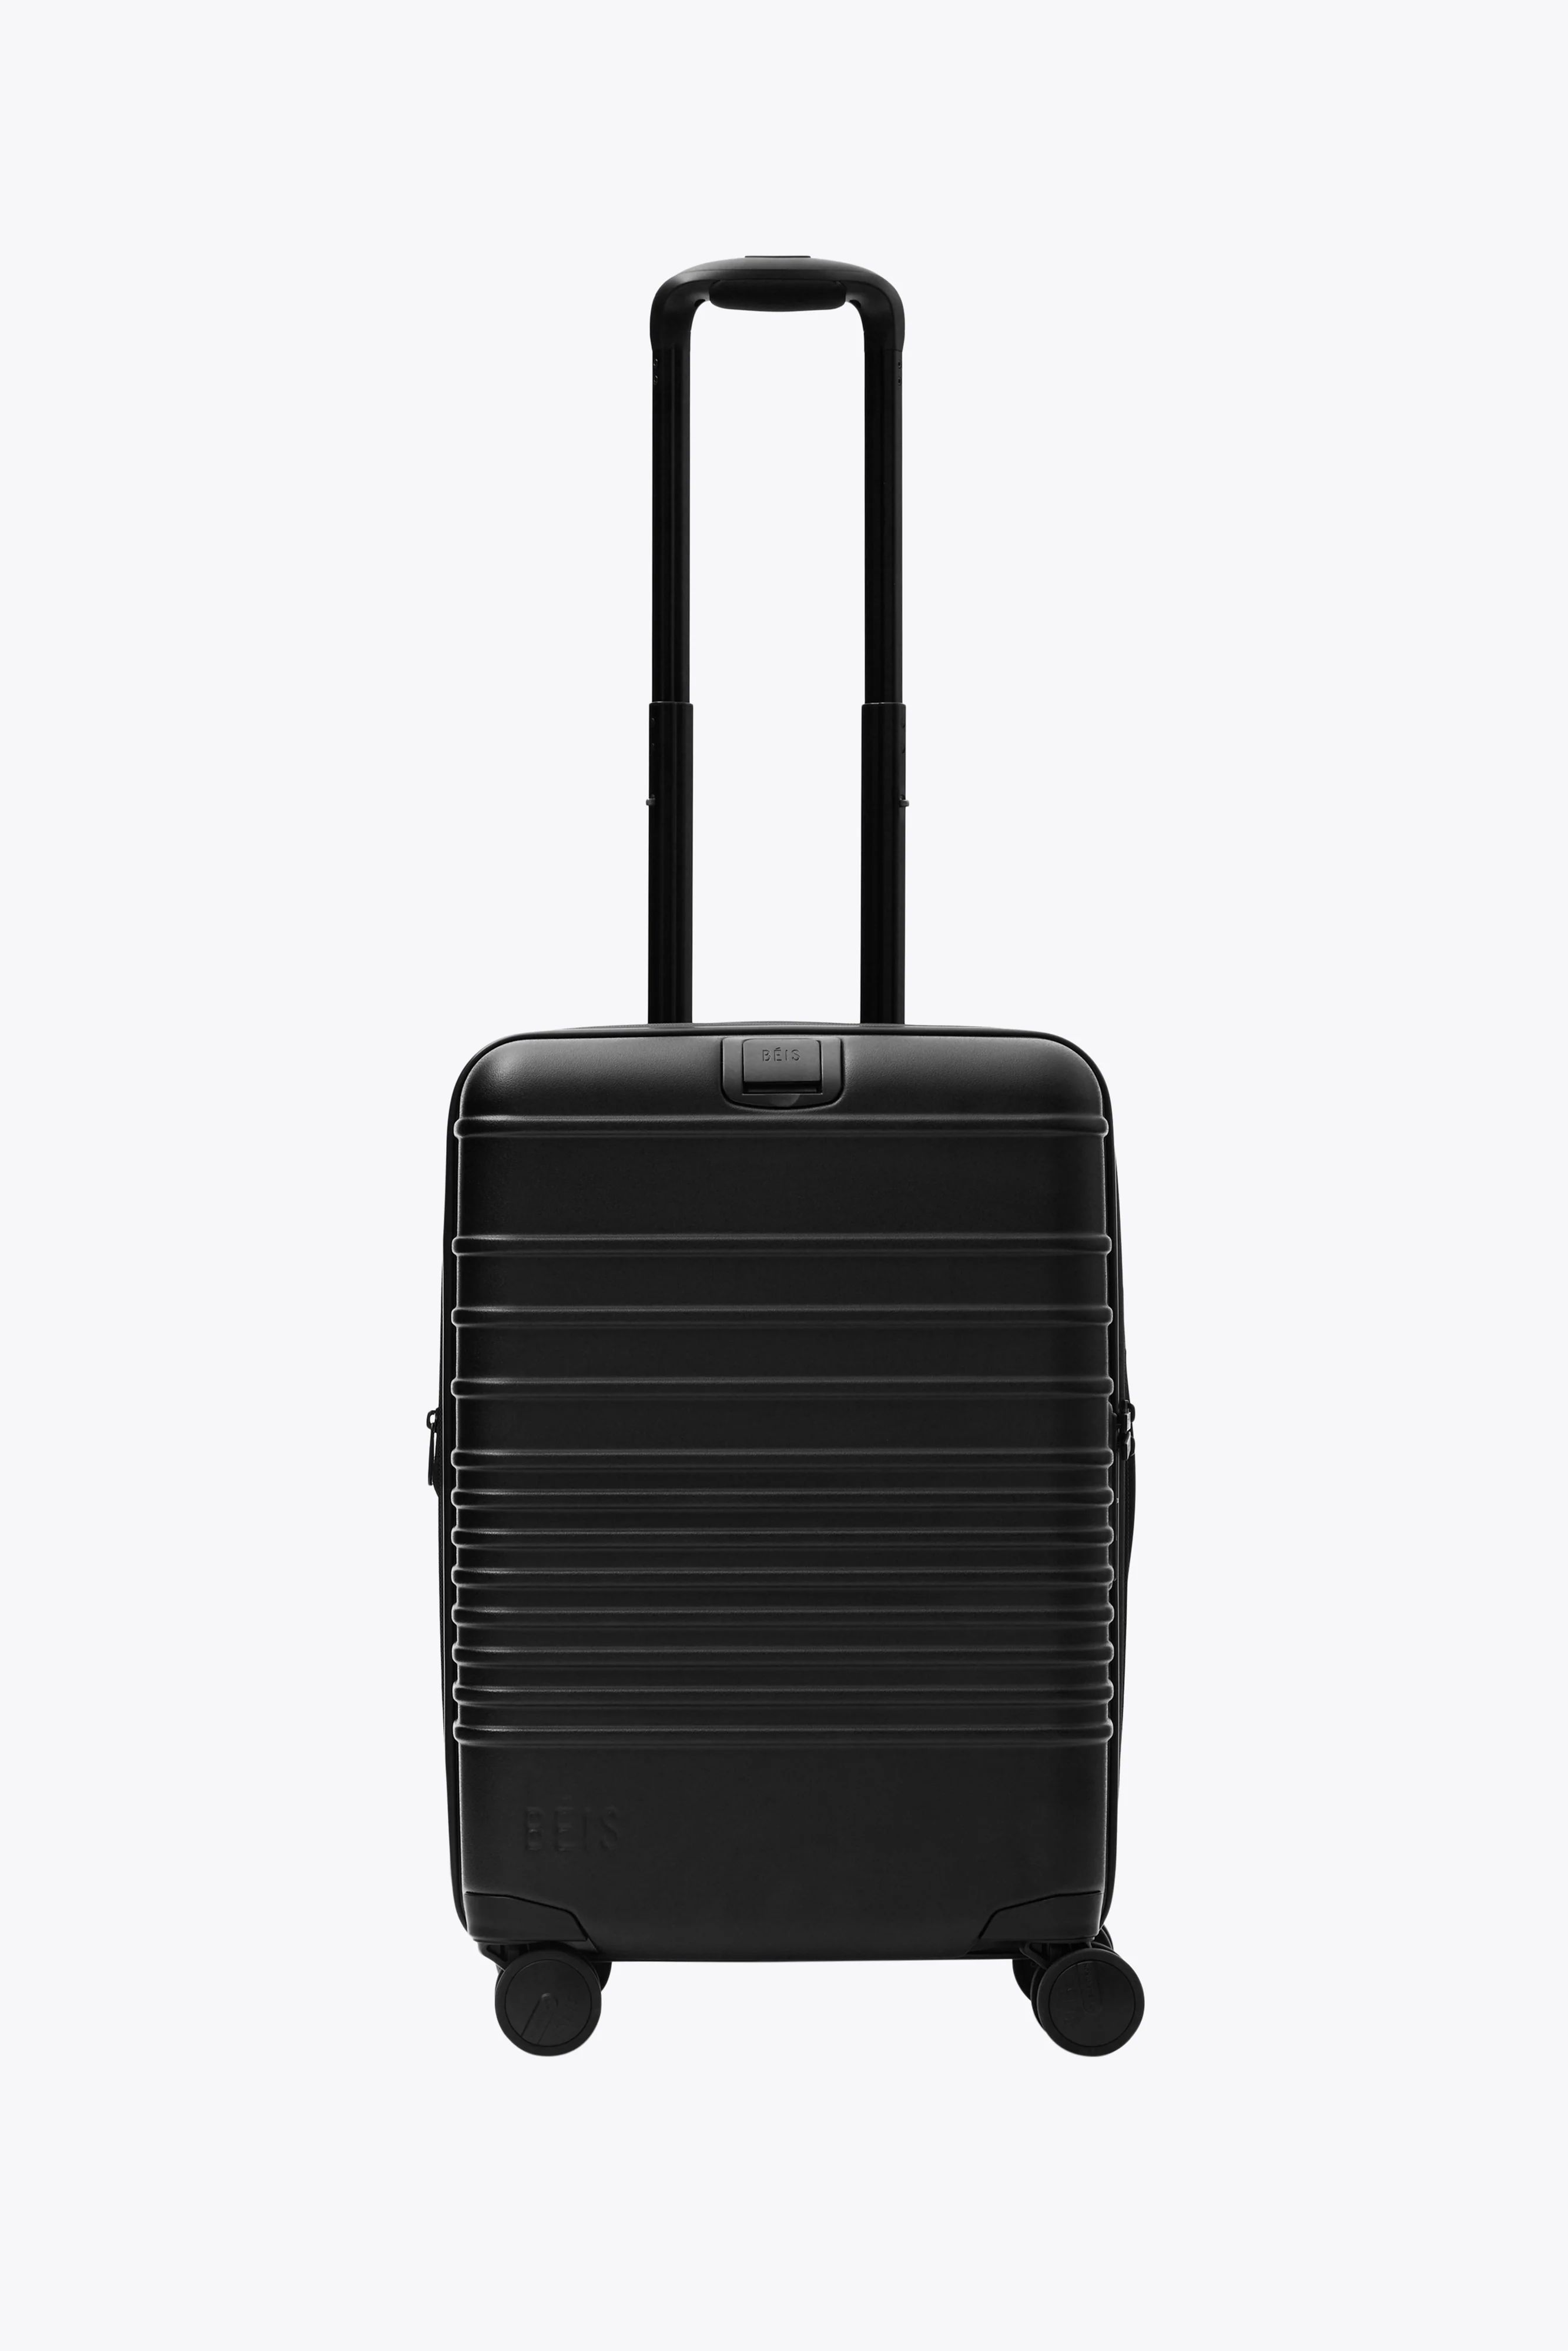 THE CARRY-ON ROLLER IN ALL BLACK | BÉIS Travel